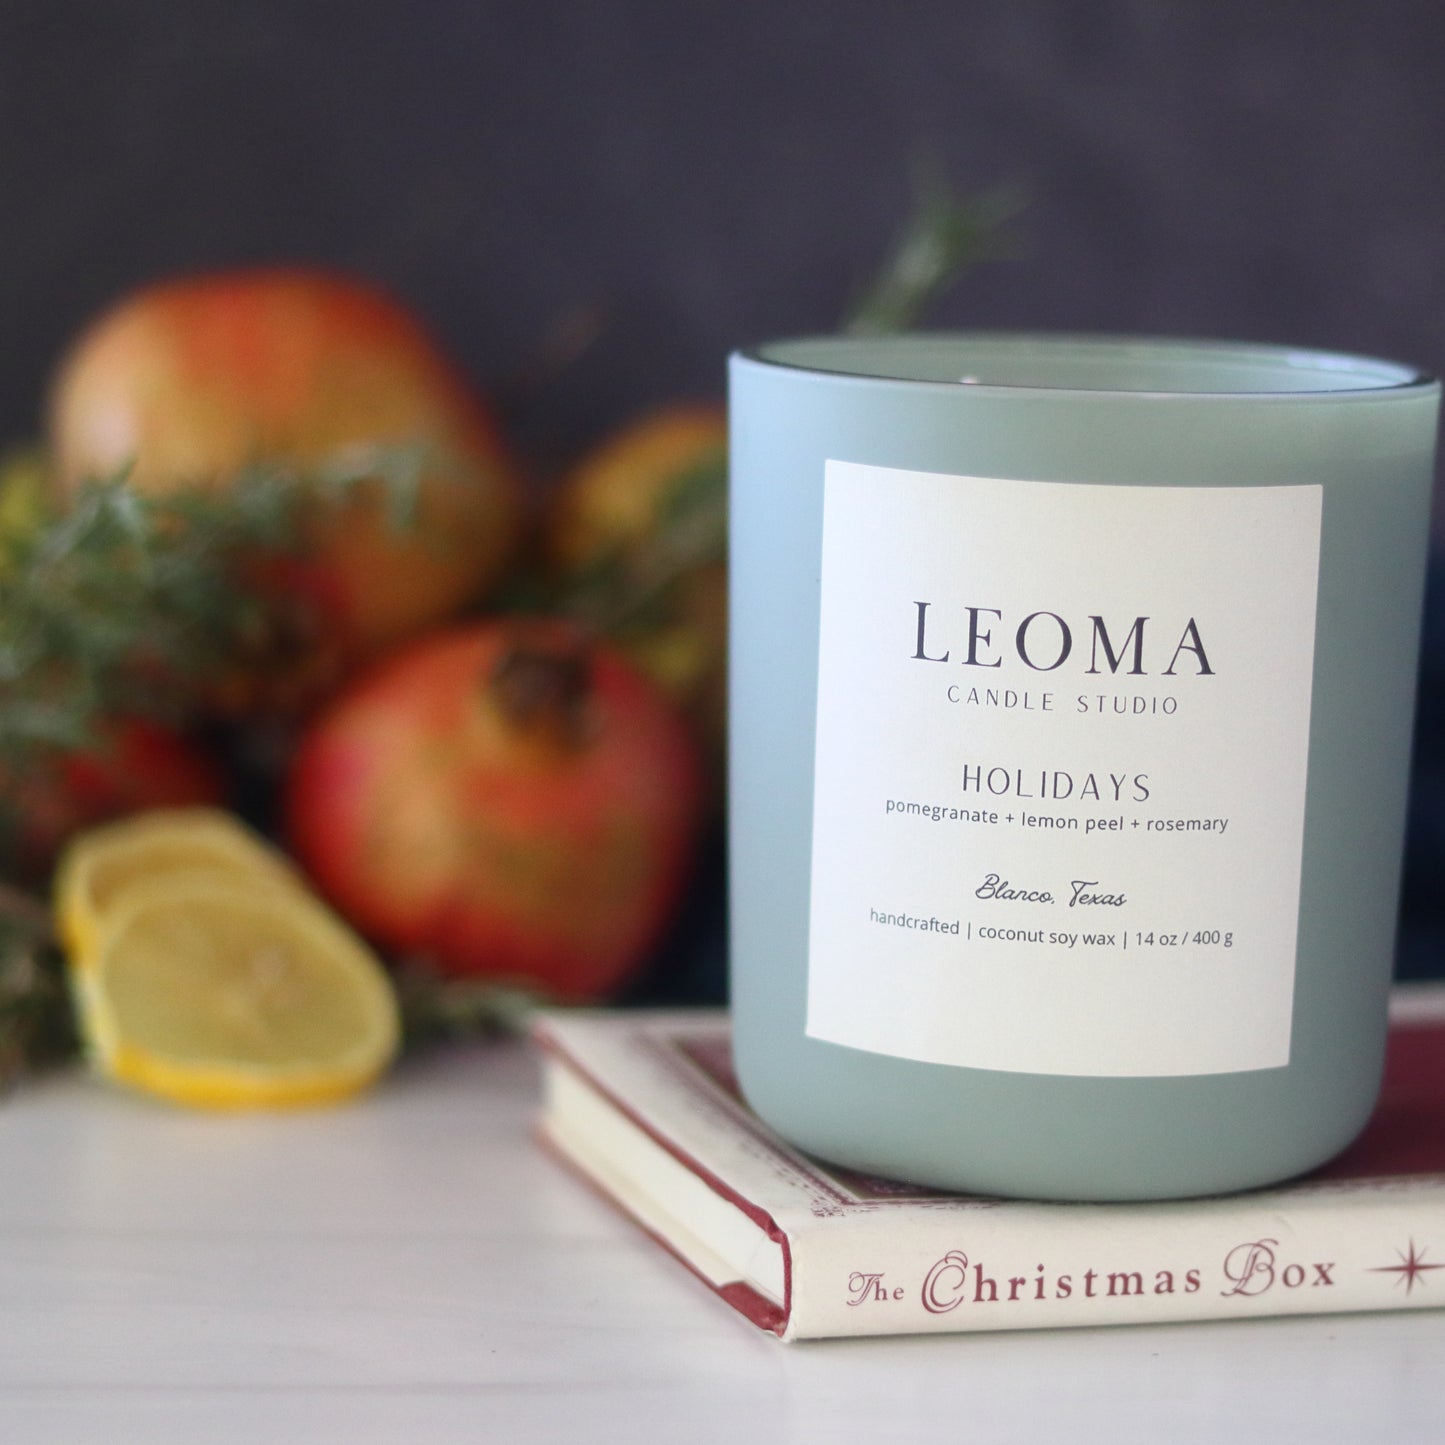 Handcrafted eco-friendly scented candle. Natural coconut & soy wax, toxin-free, 100% cotton wicks. Sage vessel. Holidays scented.